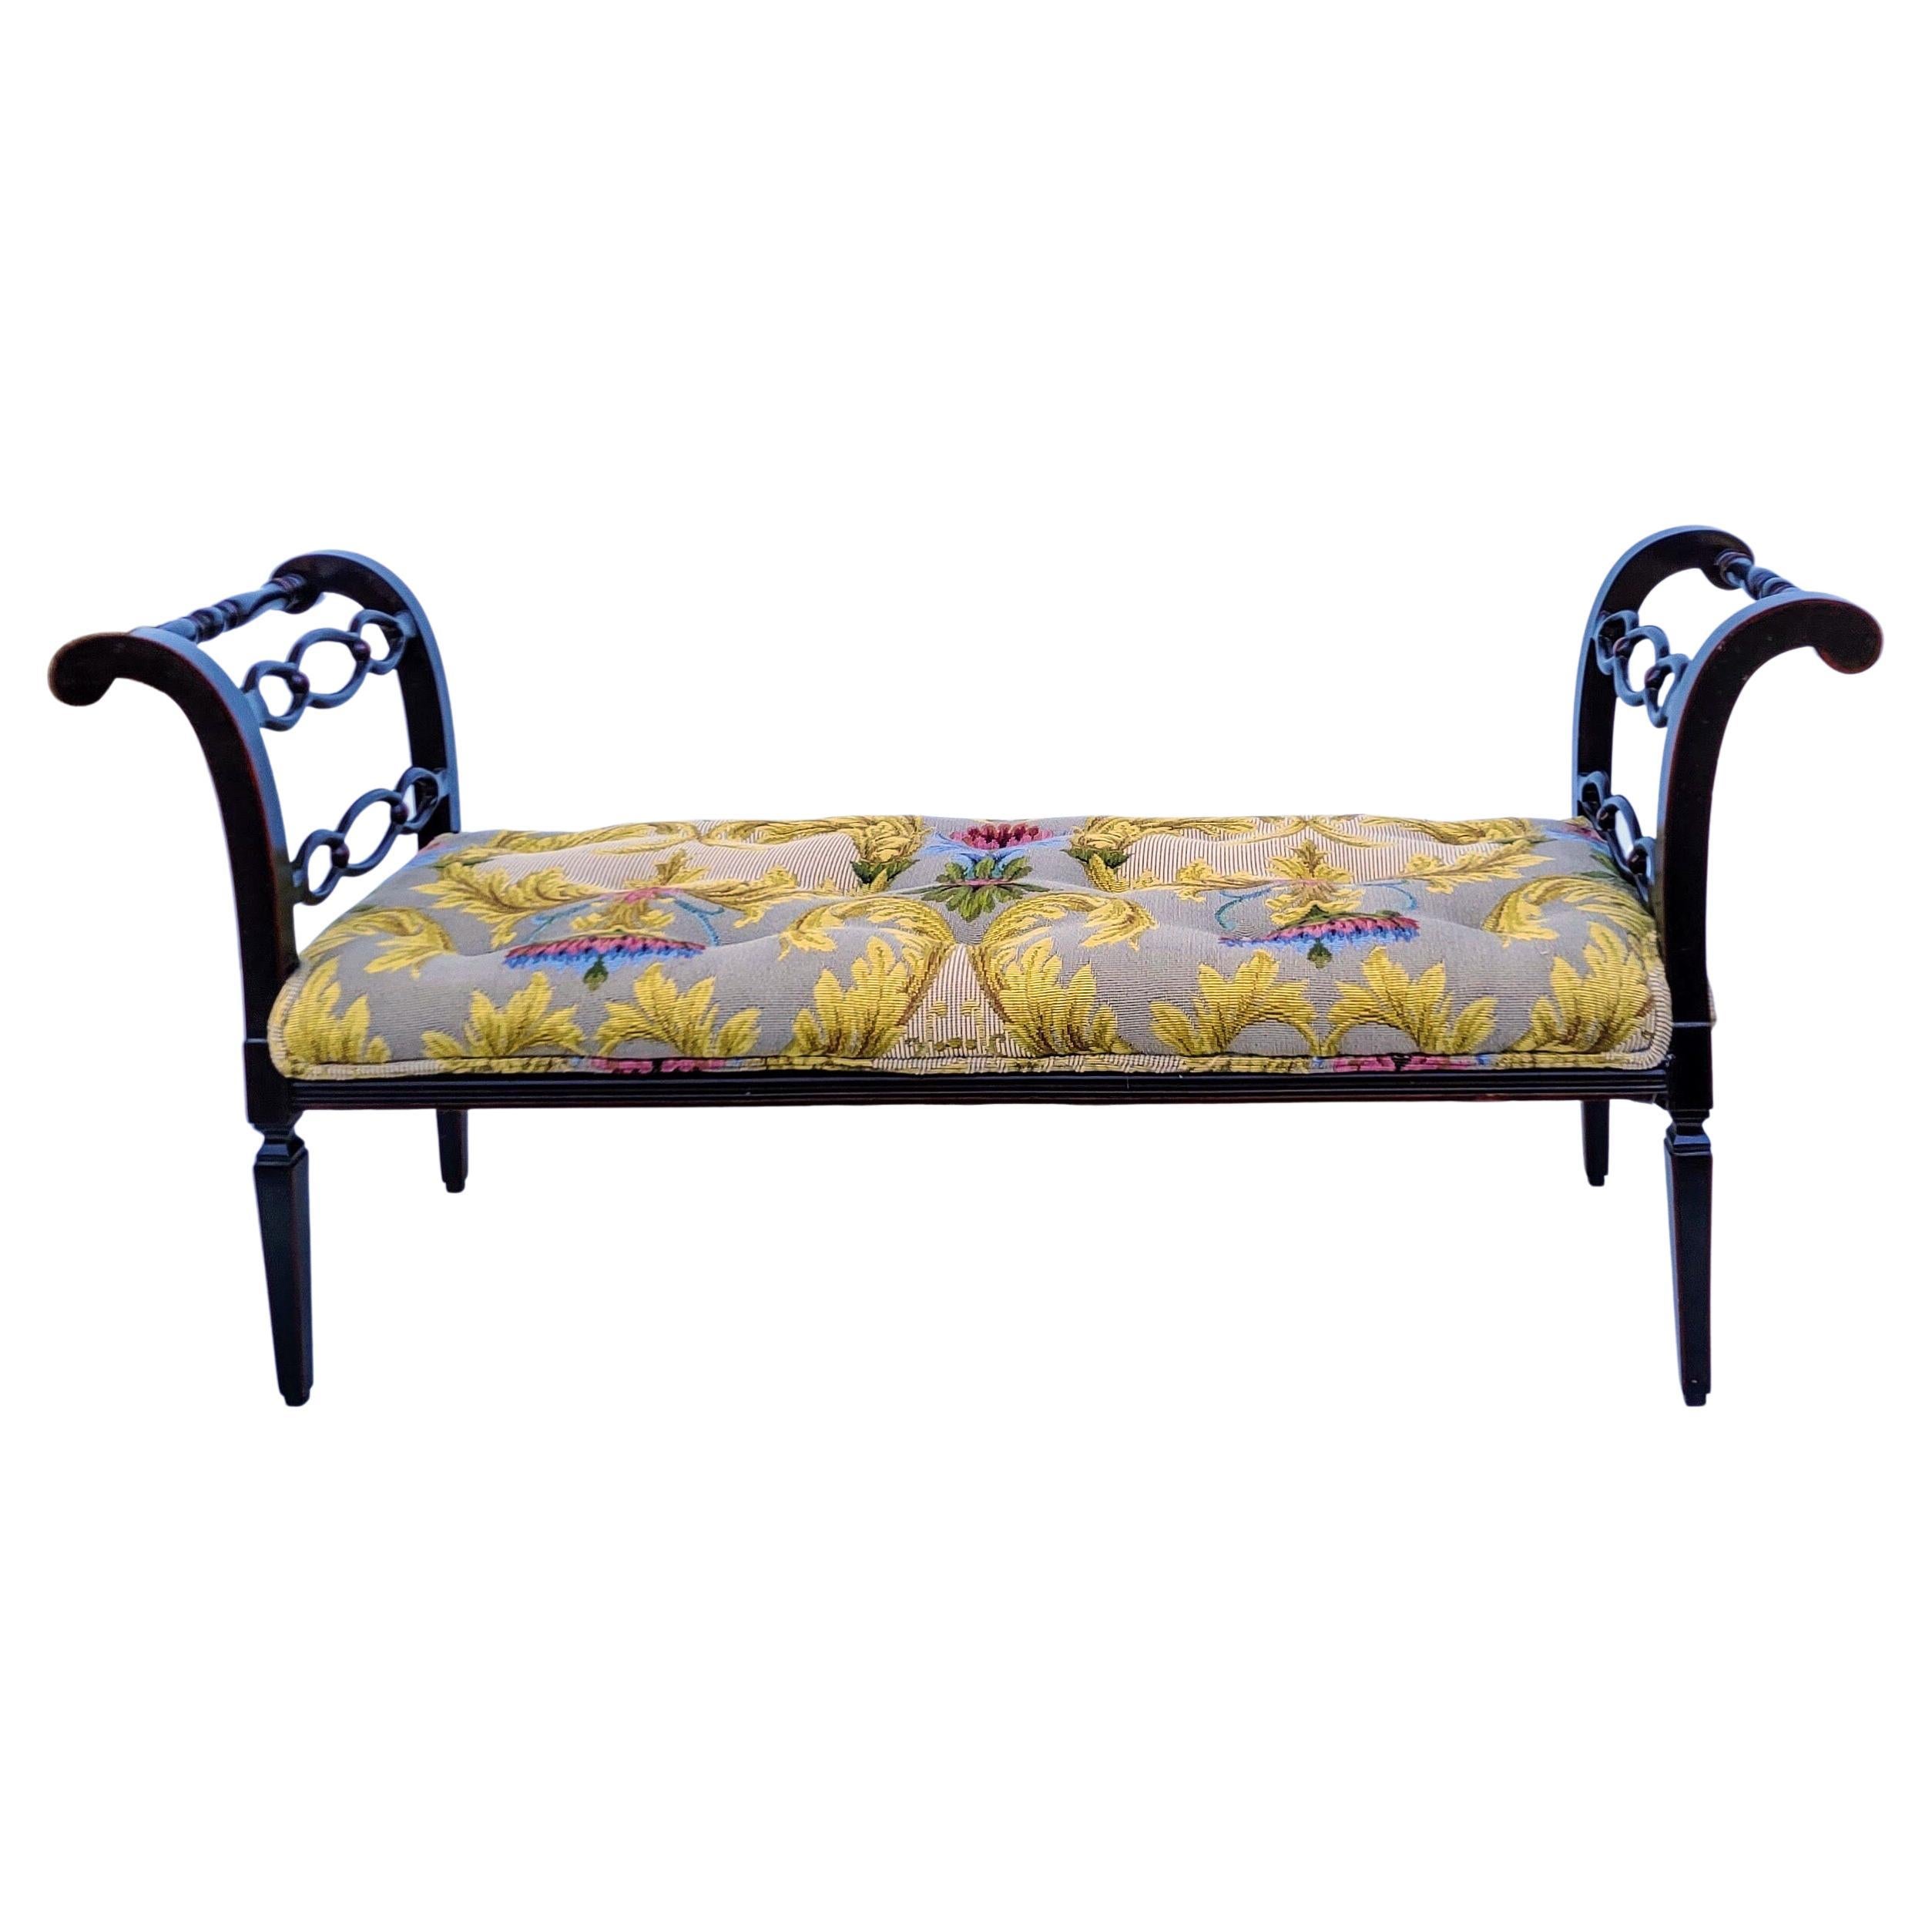 20th-C. Large Scale Painted Black Lacquer Regency Style Bench For Sale